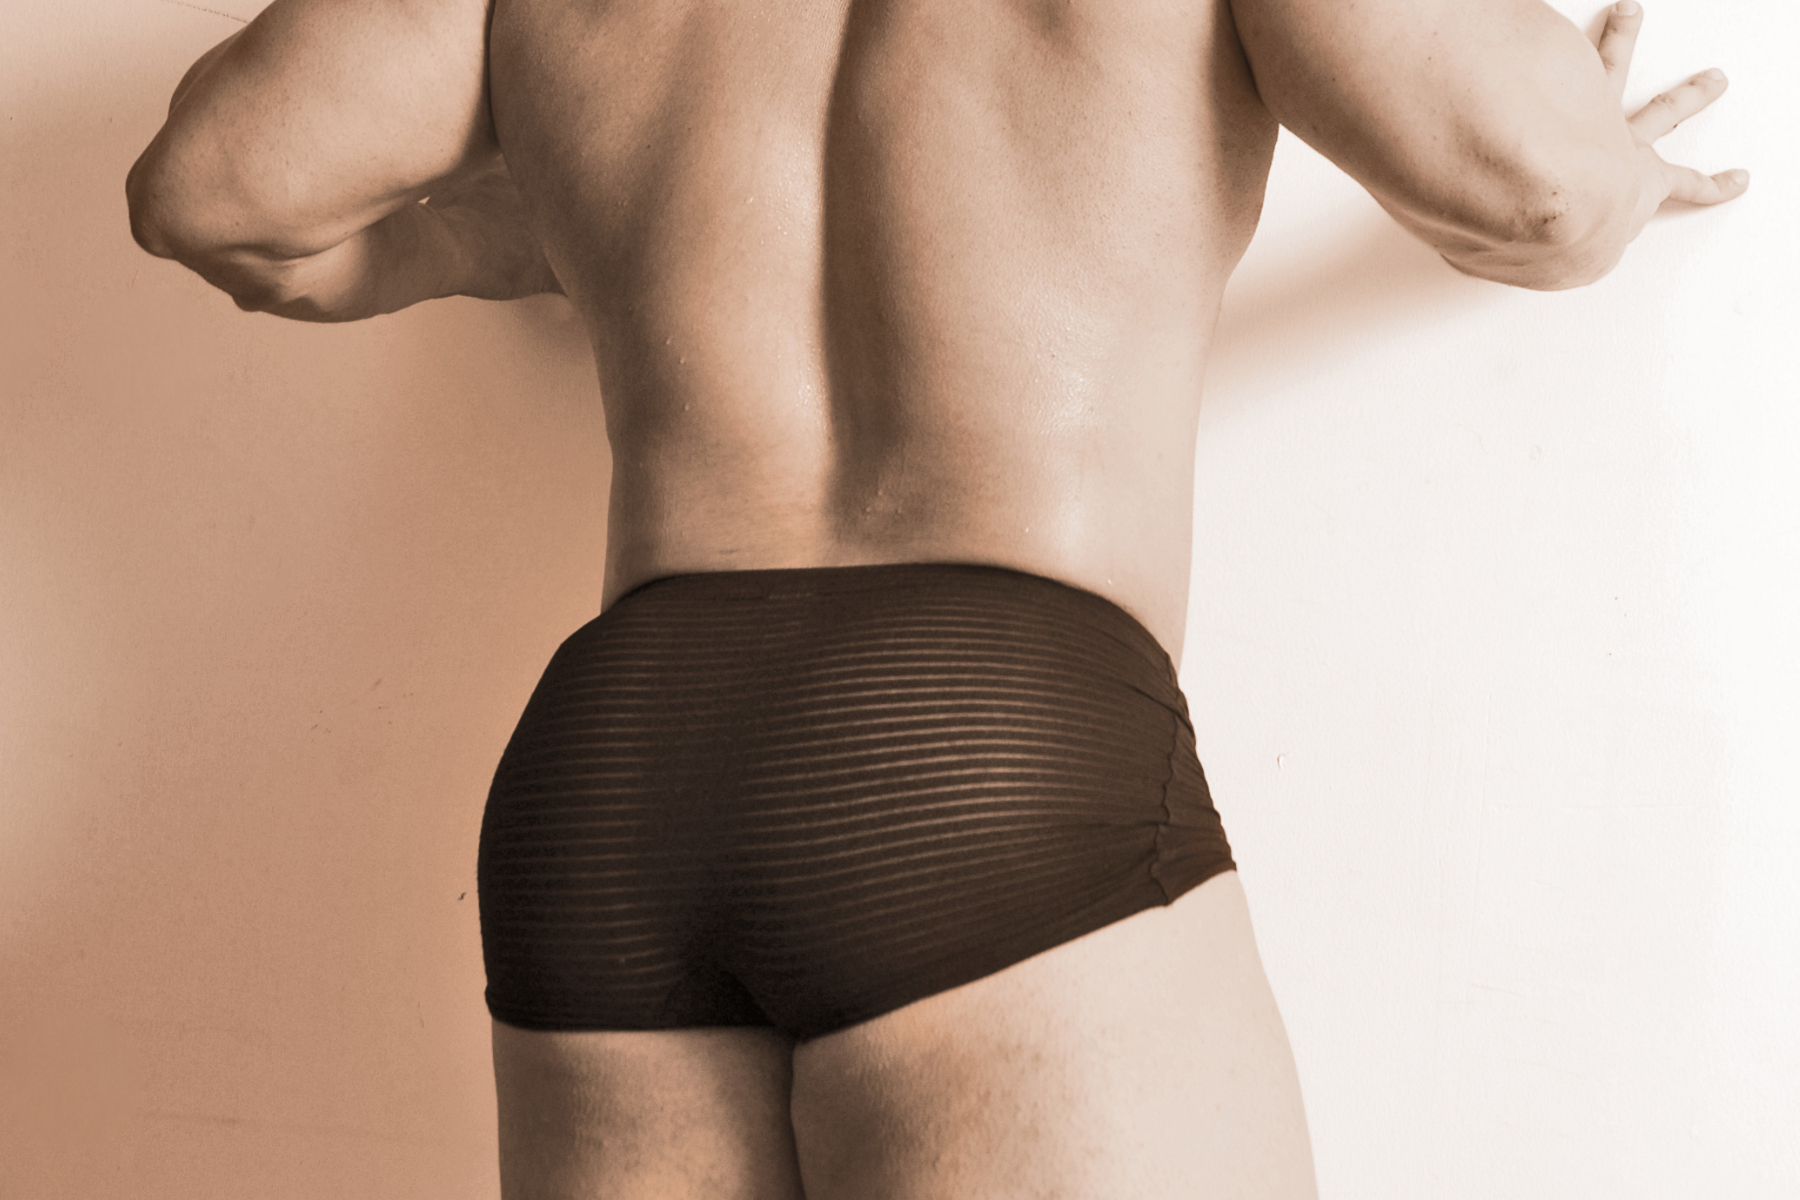 Plastic Surgeons Reveal the 'Most Desirable' Shape for a Man's Buttock